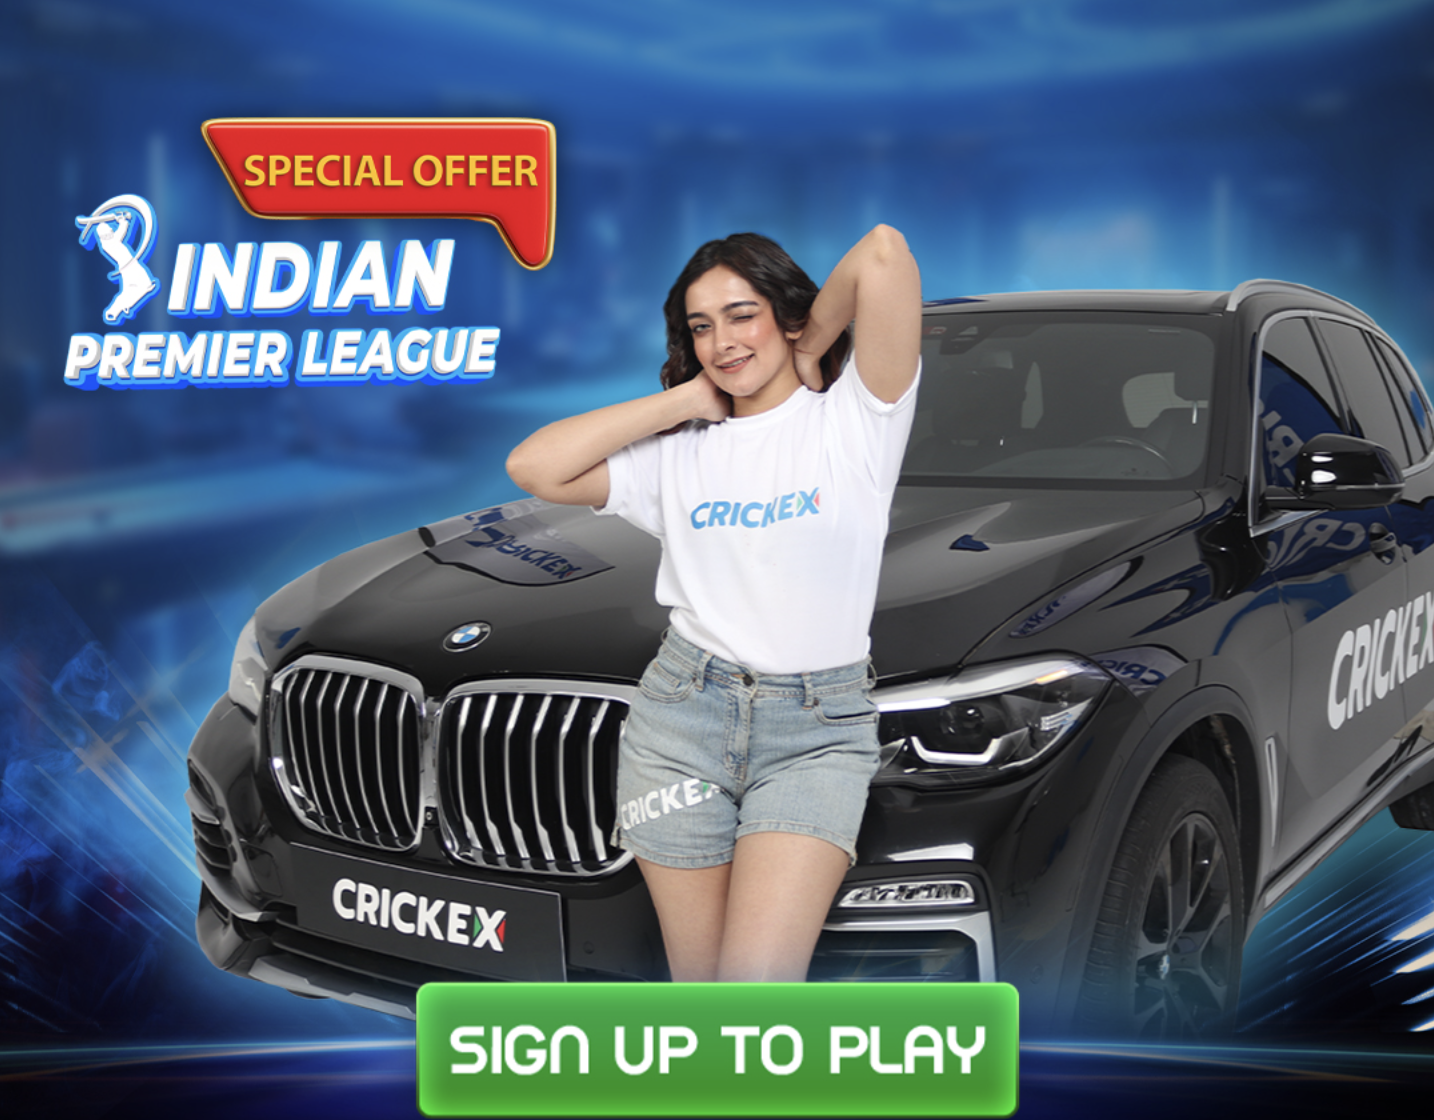 Crickex IPL Special Offer: Make Daily Deposits & Stand a Chance to Win Top Prize